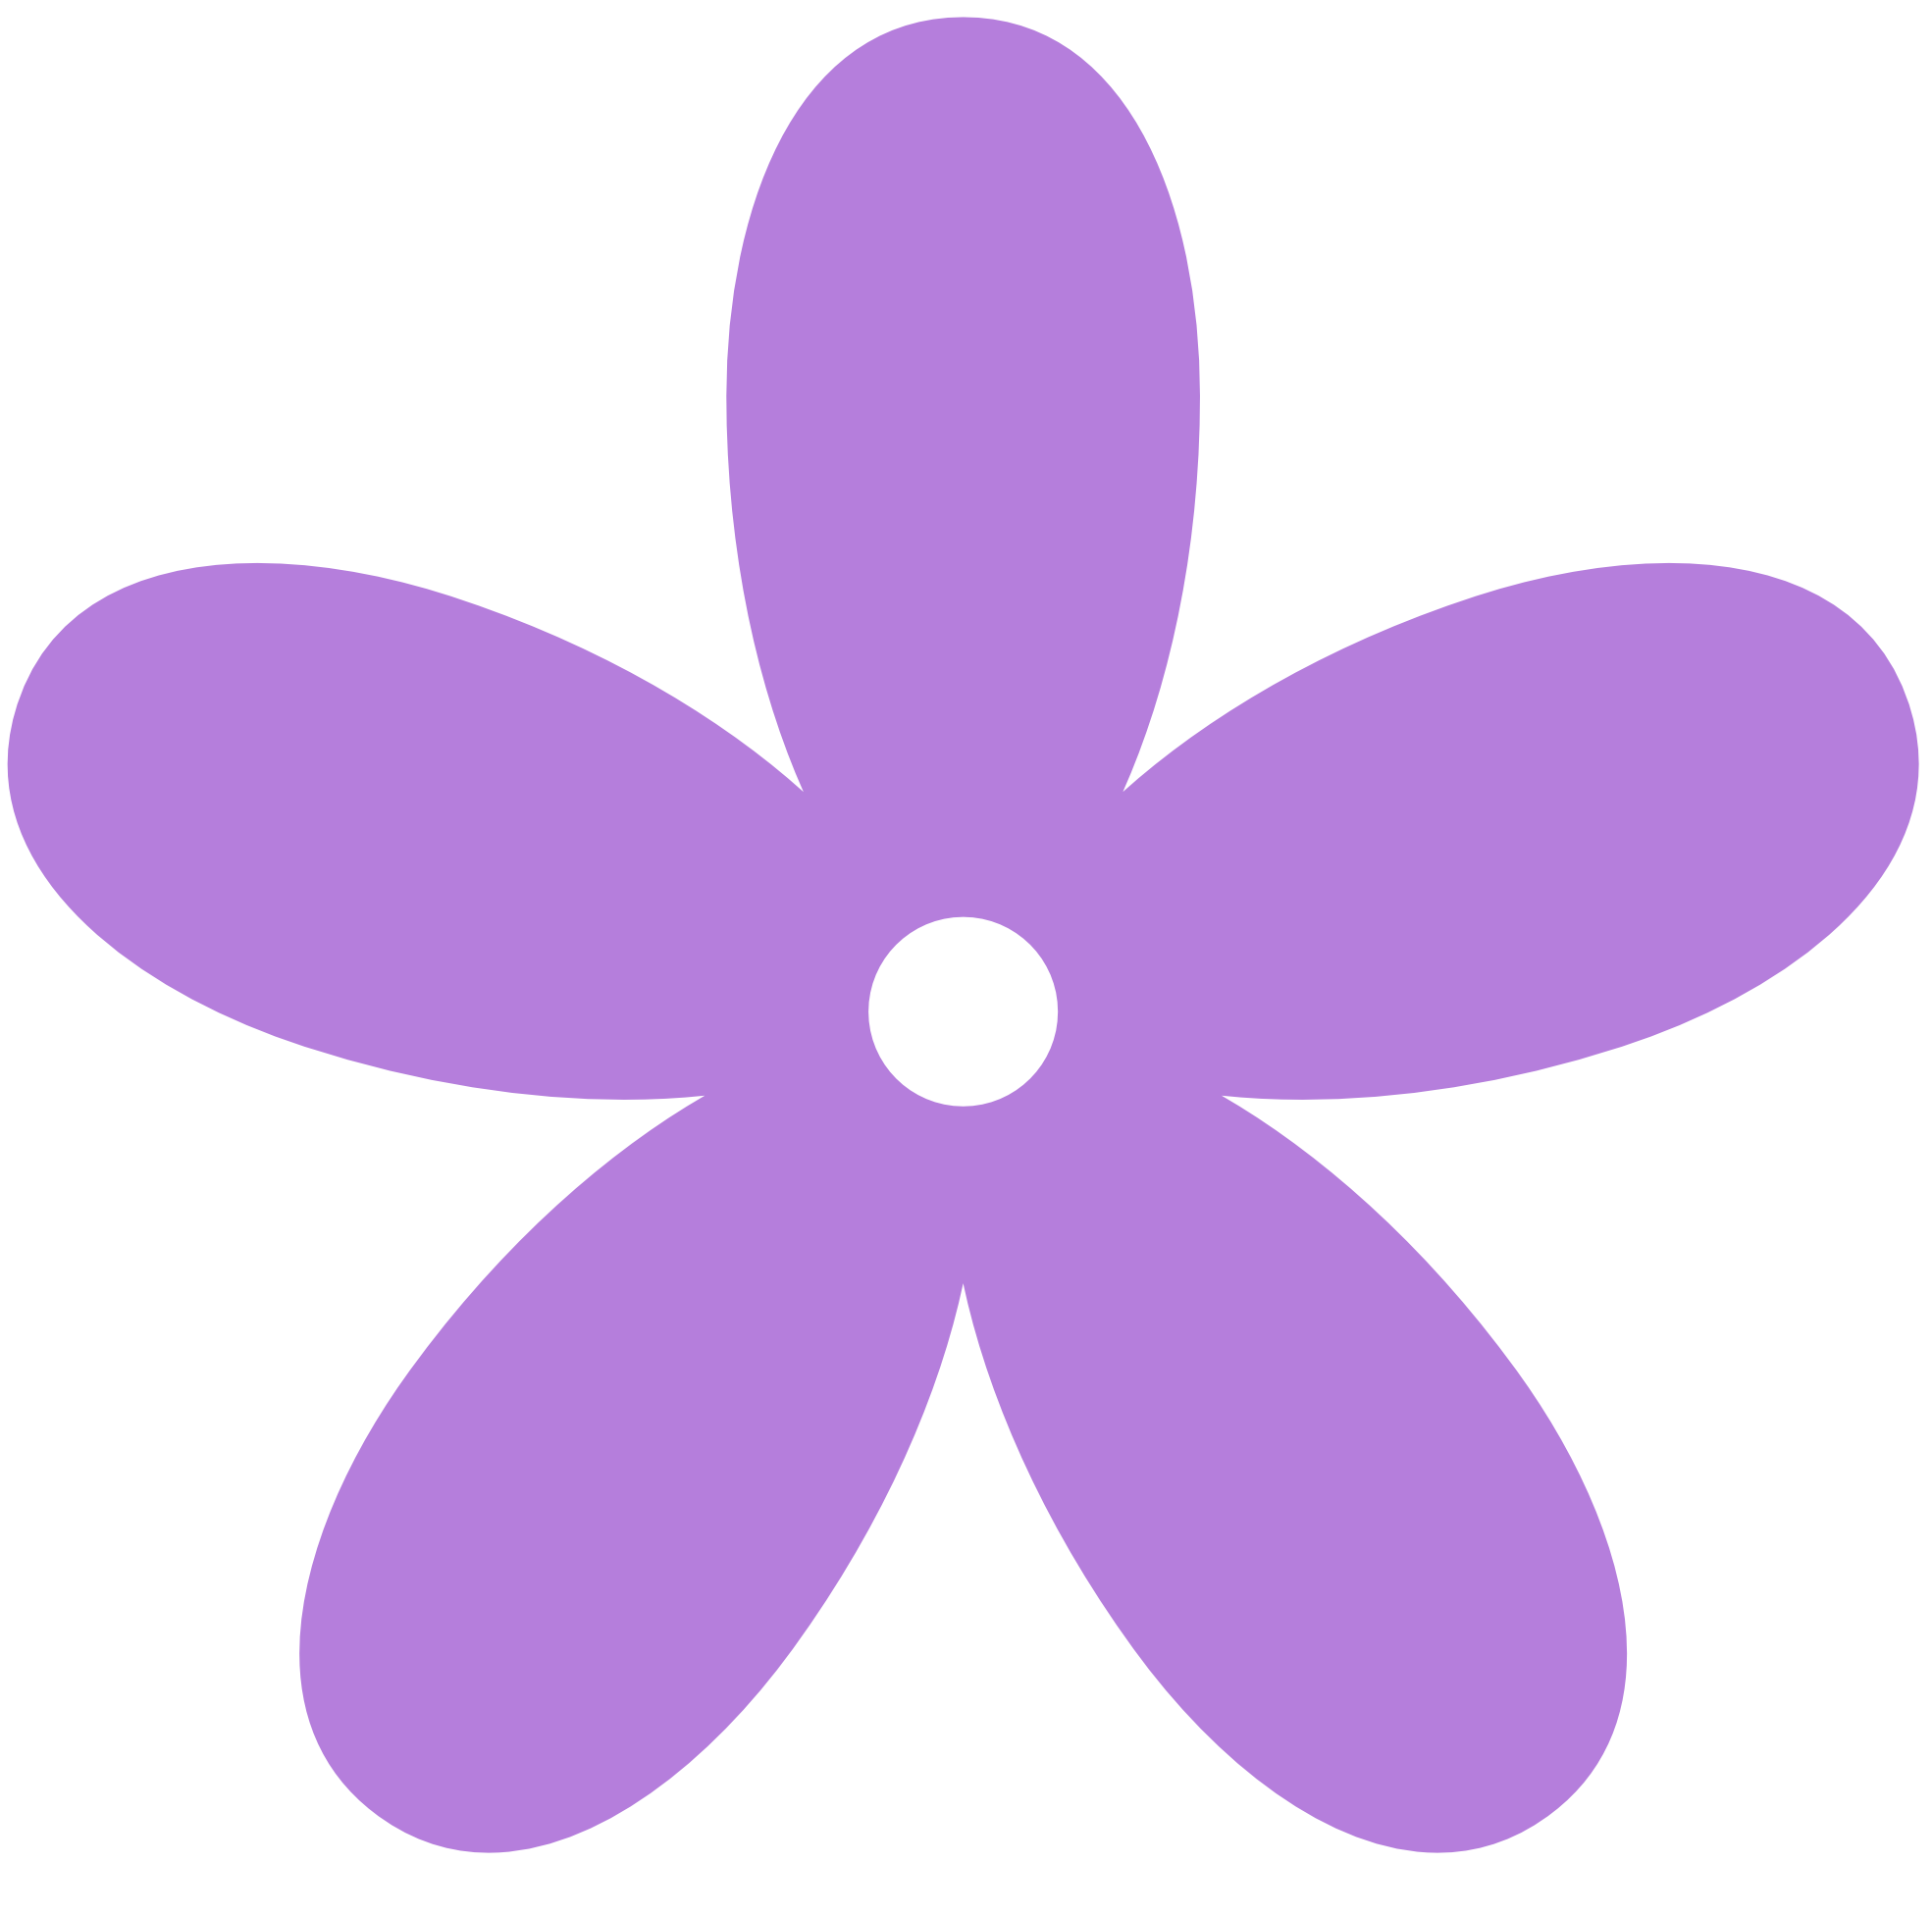 Lavender flowers clipart - Clipground